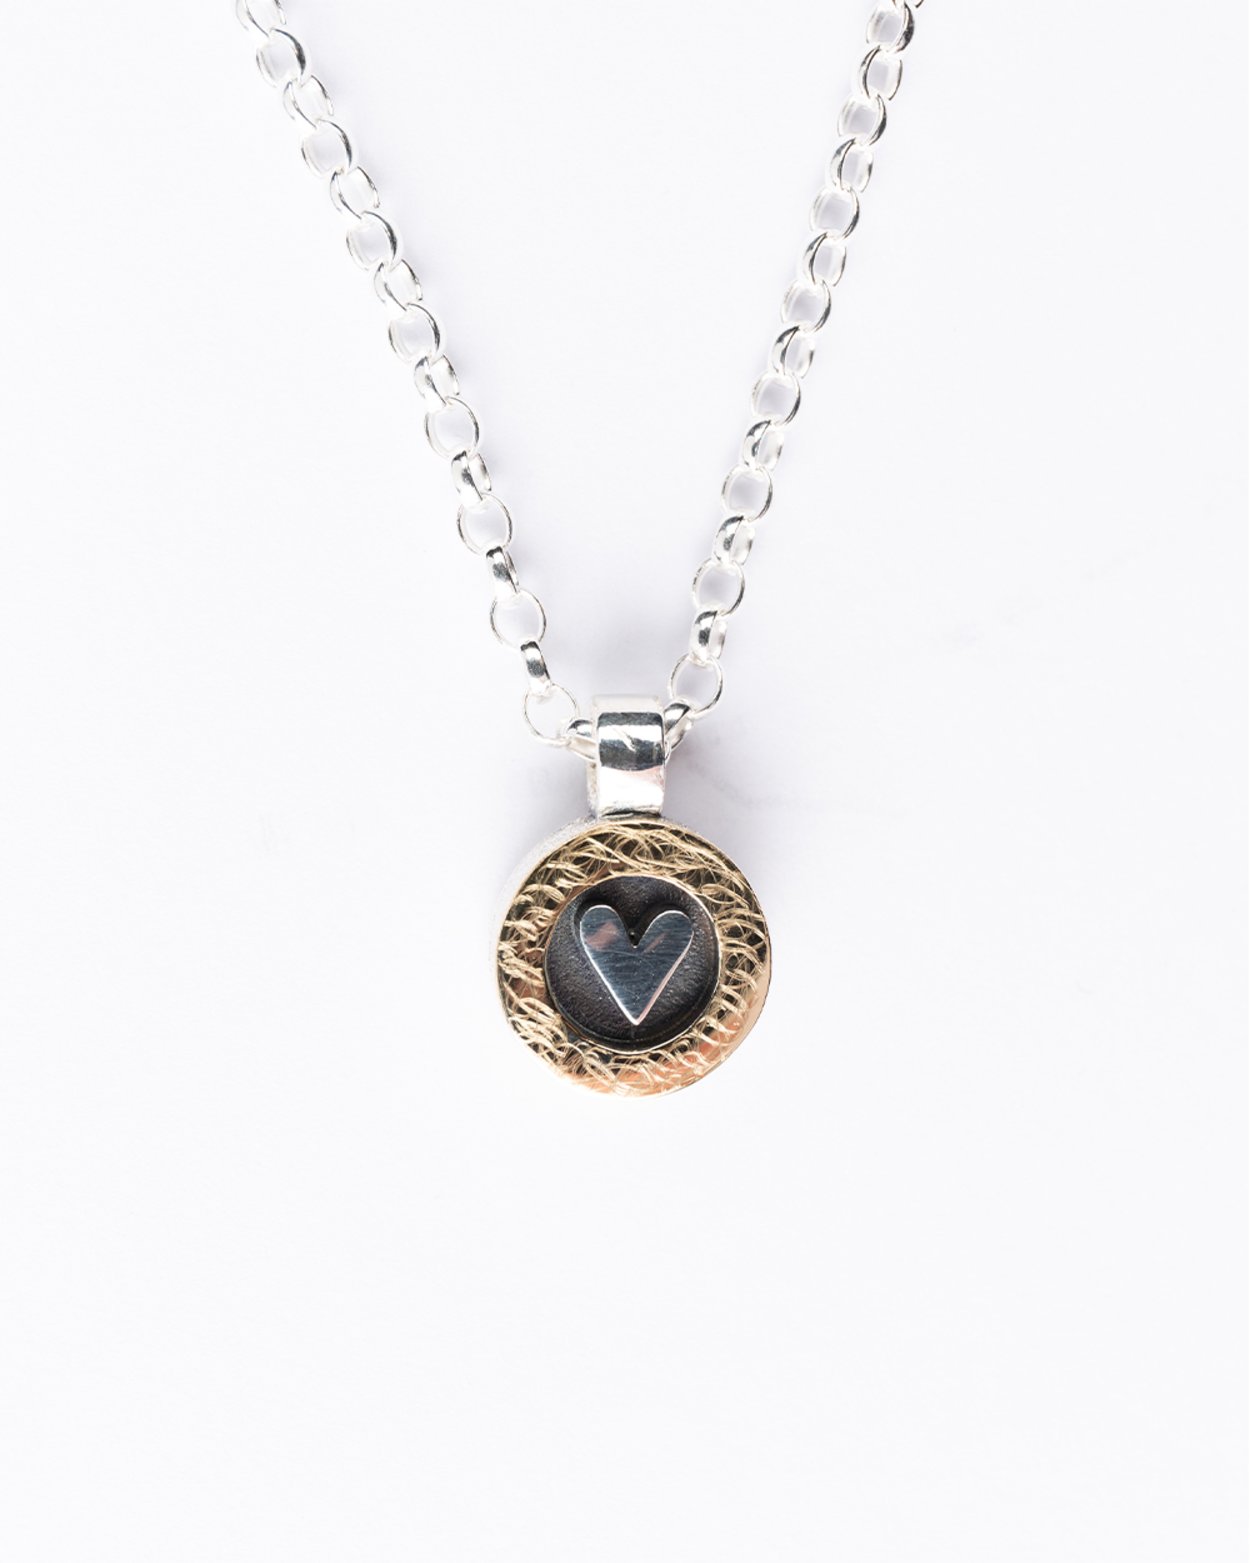 From the Heart Pendant